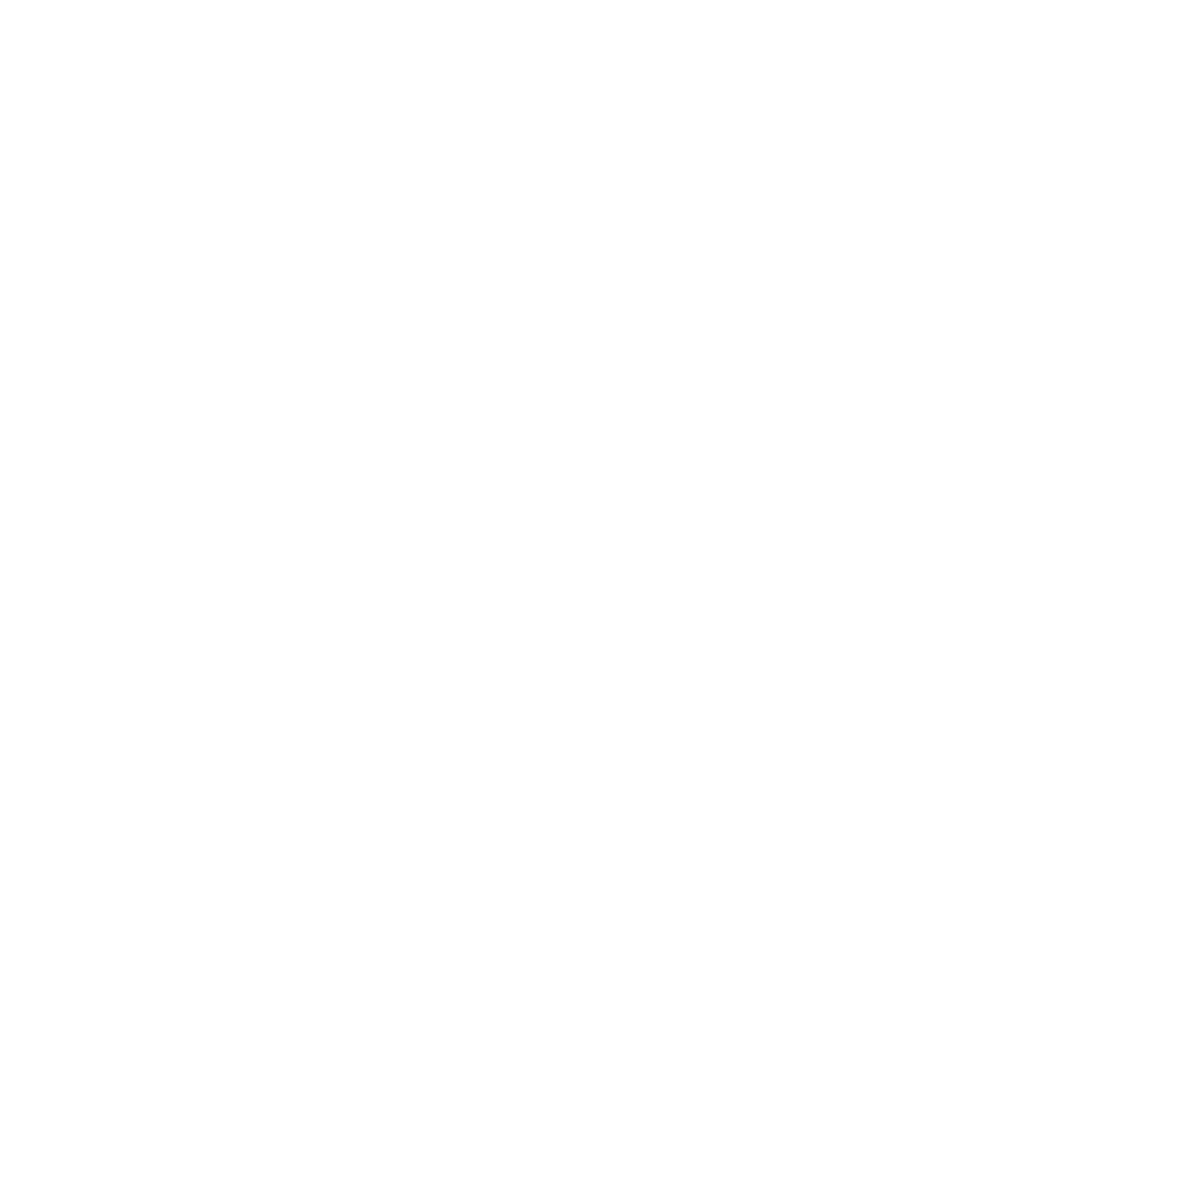 Eviction Prevention House Hands Icon